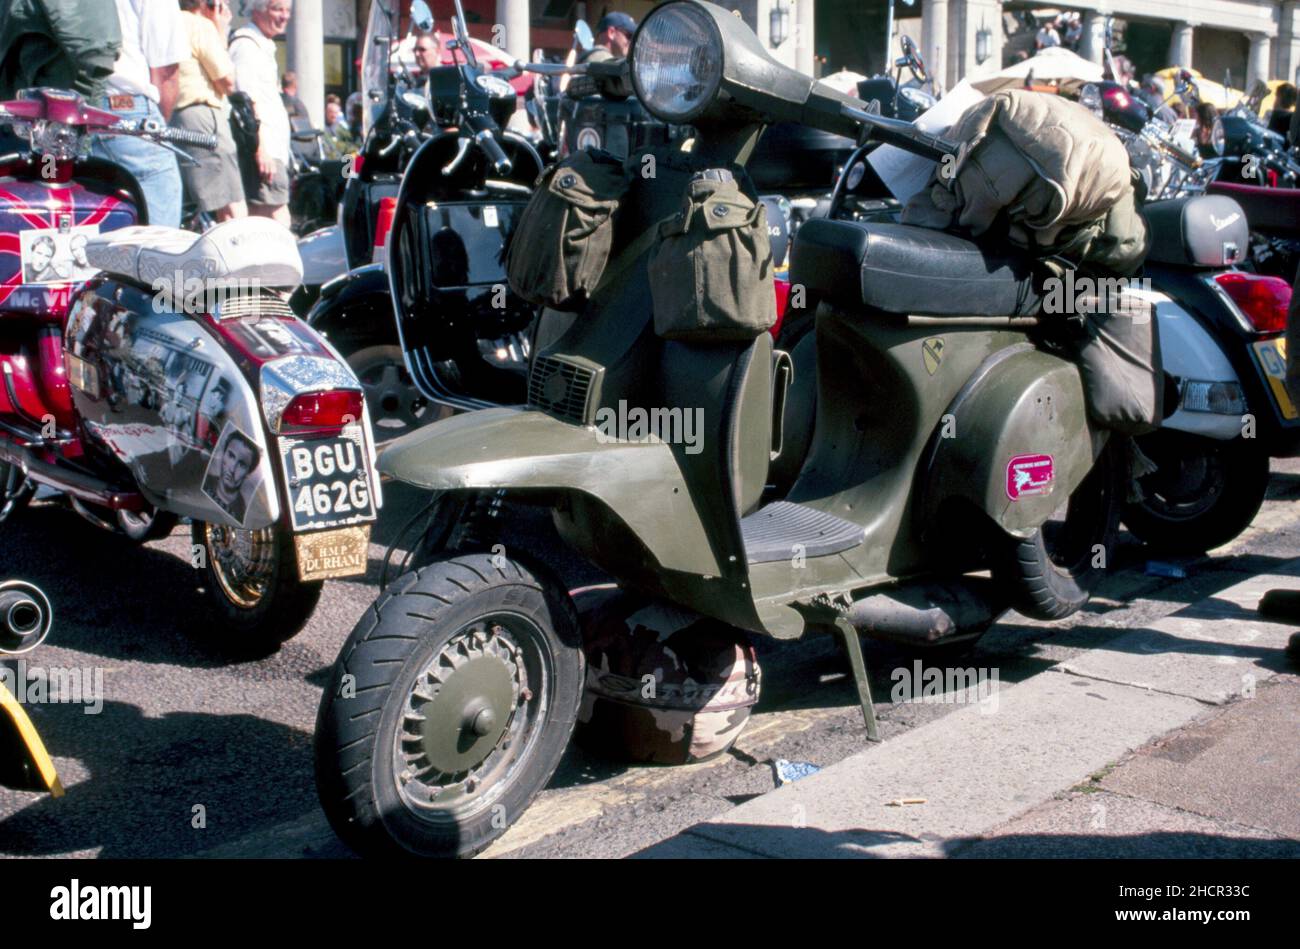 Military scooter in army green colour with water bottles on the front Stock Photo